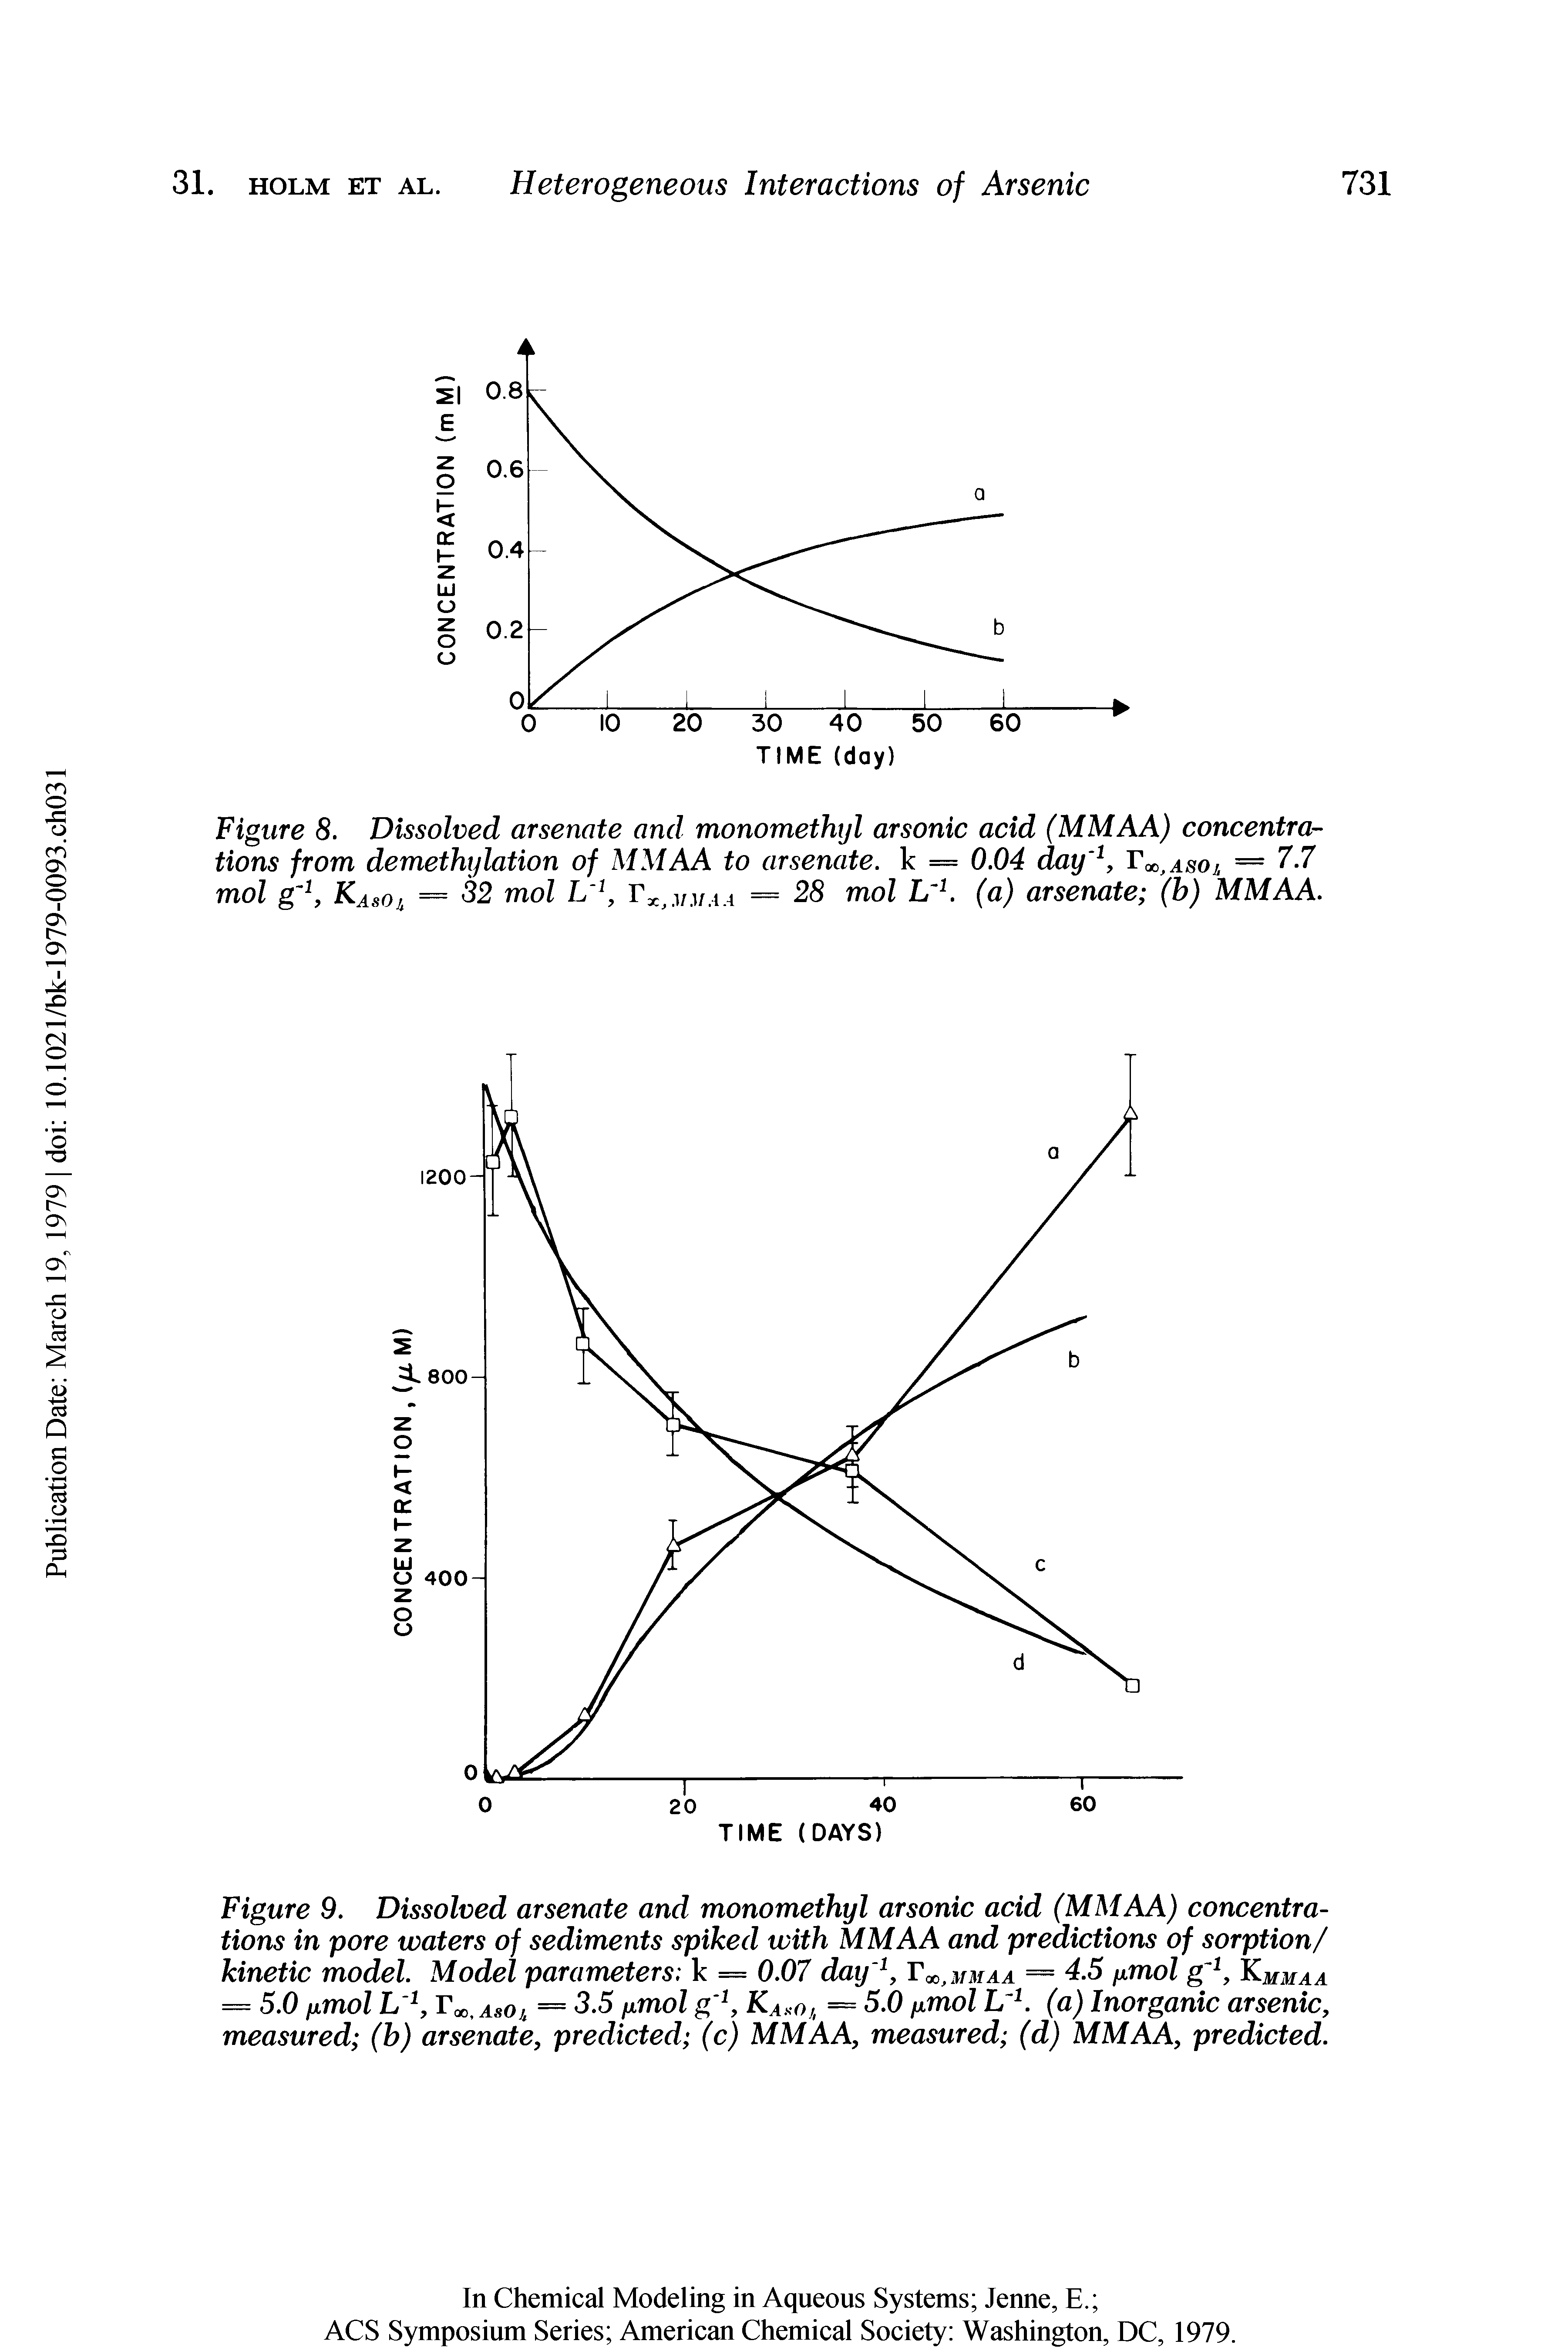 Figure 9. Dissolved arsenate and monomethyl arsonic acid (MMAA) concentrations in pore waters of sediments spiked with MMAA and predictions of sorption/ kinetic model. Model parameters k = 0.07 day, T o mmaa = 4.5 fxmol g, Kmmaa = 5.0 fxmol L Tcc,AsOi = 3.5 fxmol g Ka. o, = 5.0 fxmol L k (a) Inorganic arsenic, measured (b) arsenate, predicted (c) MMAA, measured (d) MMAA, predicted.